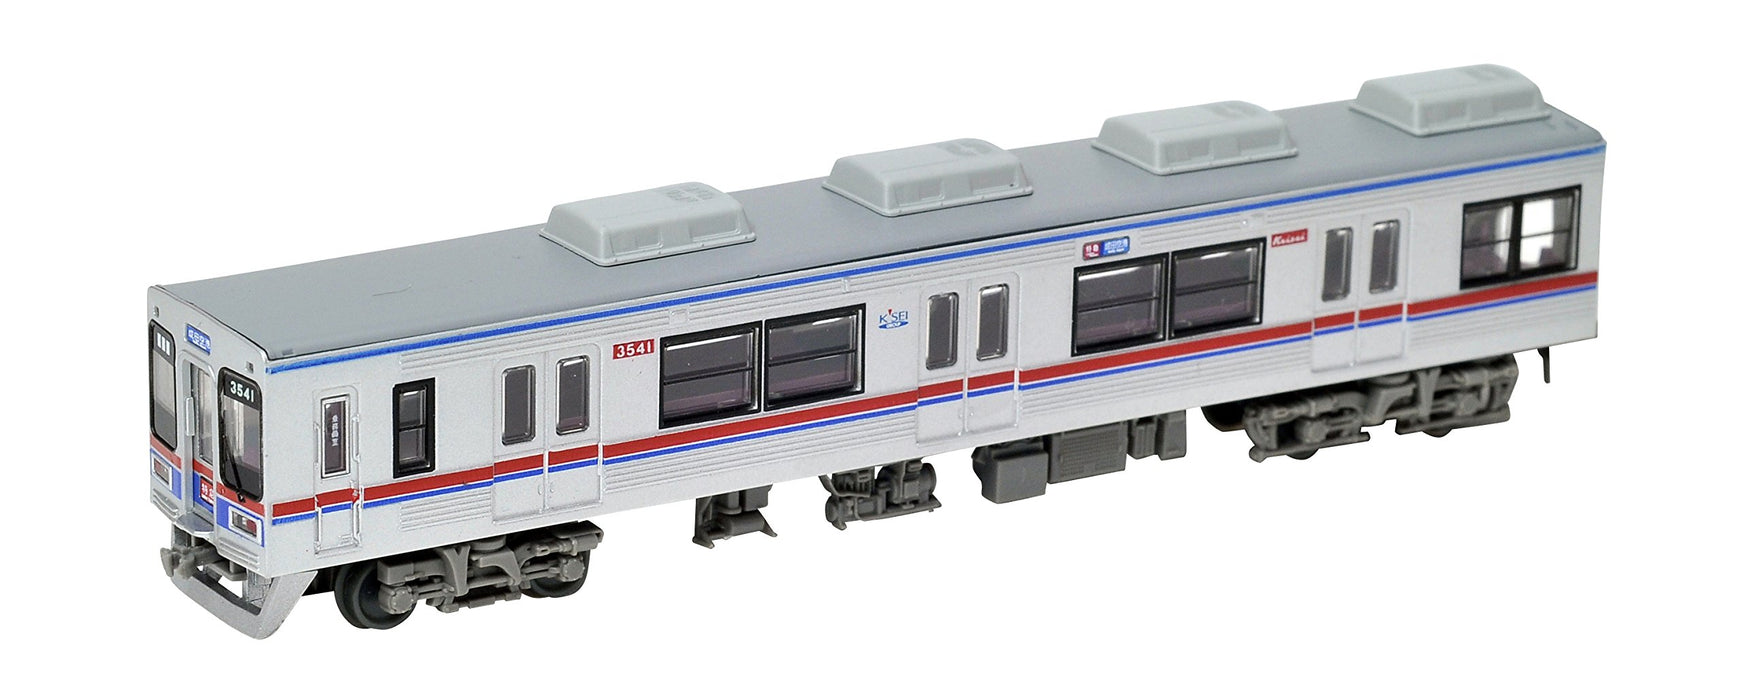 Tomytec Railway Collection - Keisei Electric Type 3500 4-Car Set B Updated Model